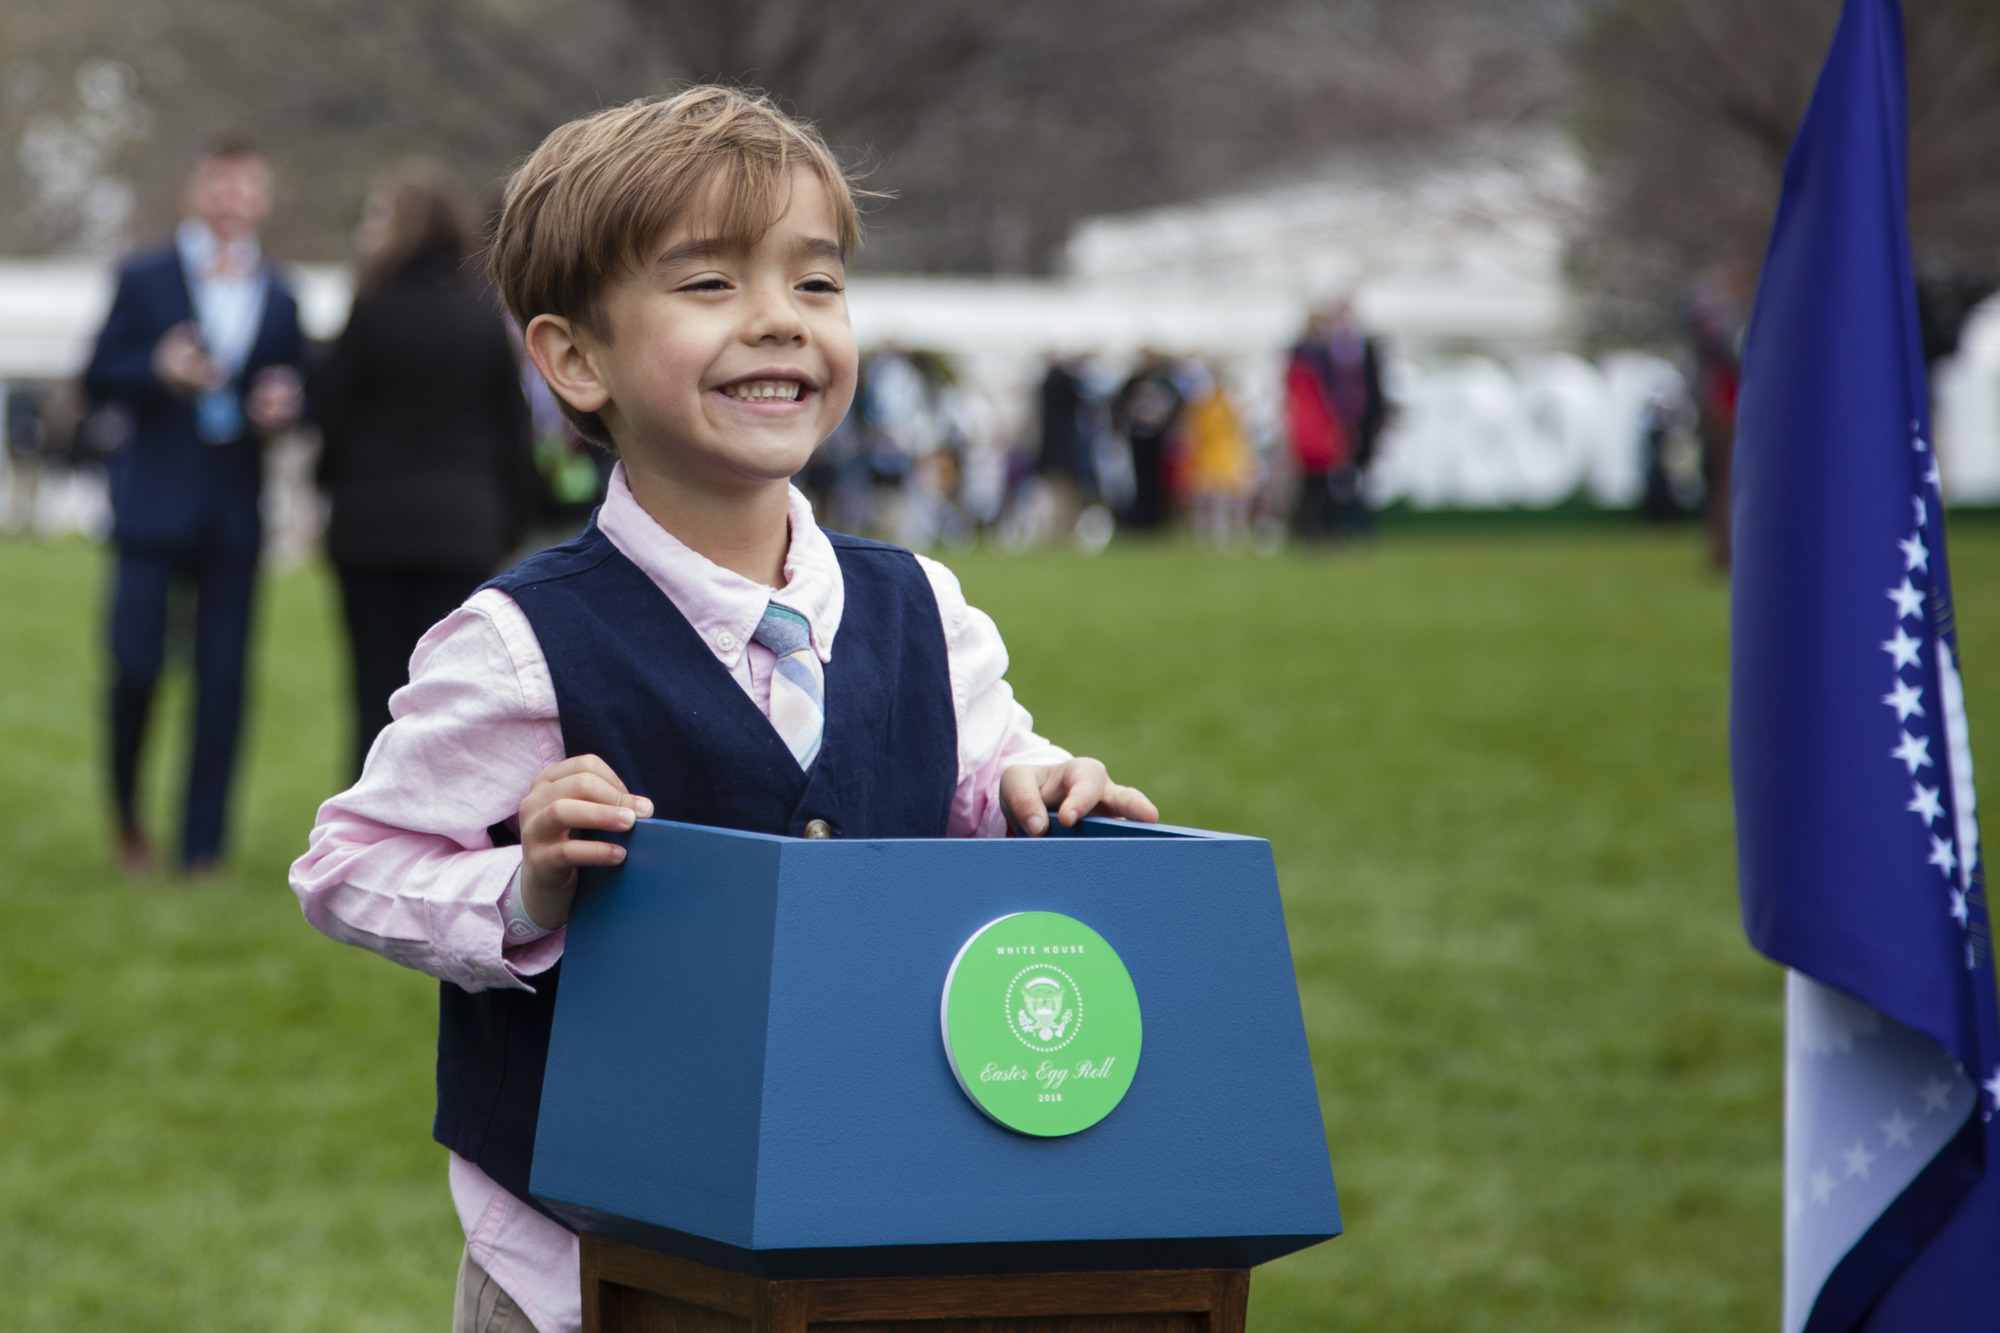 A young boy poses as the future President of the United States in front of the White House. 